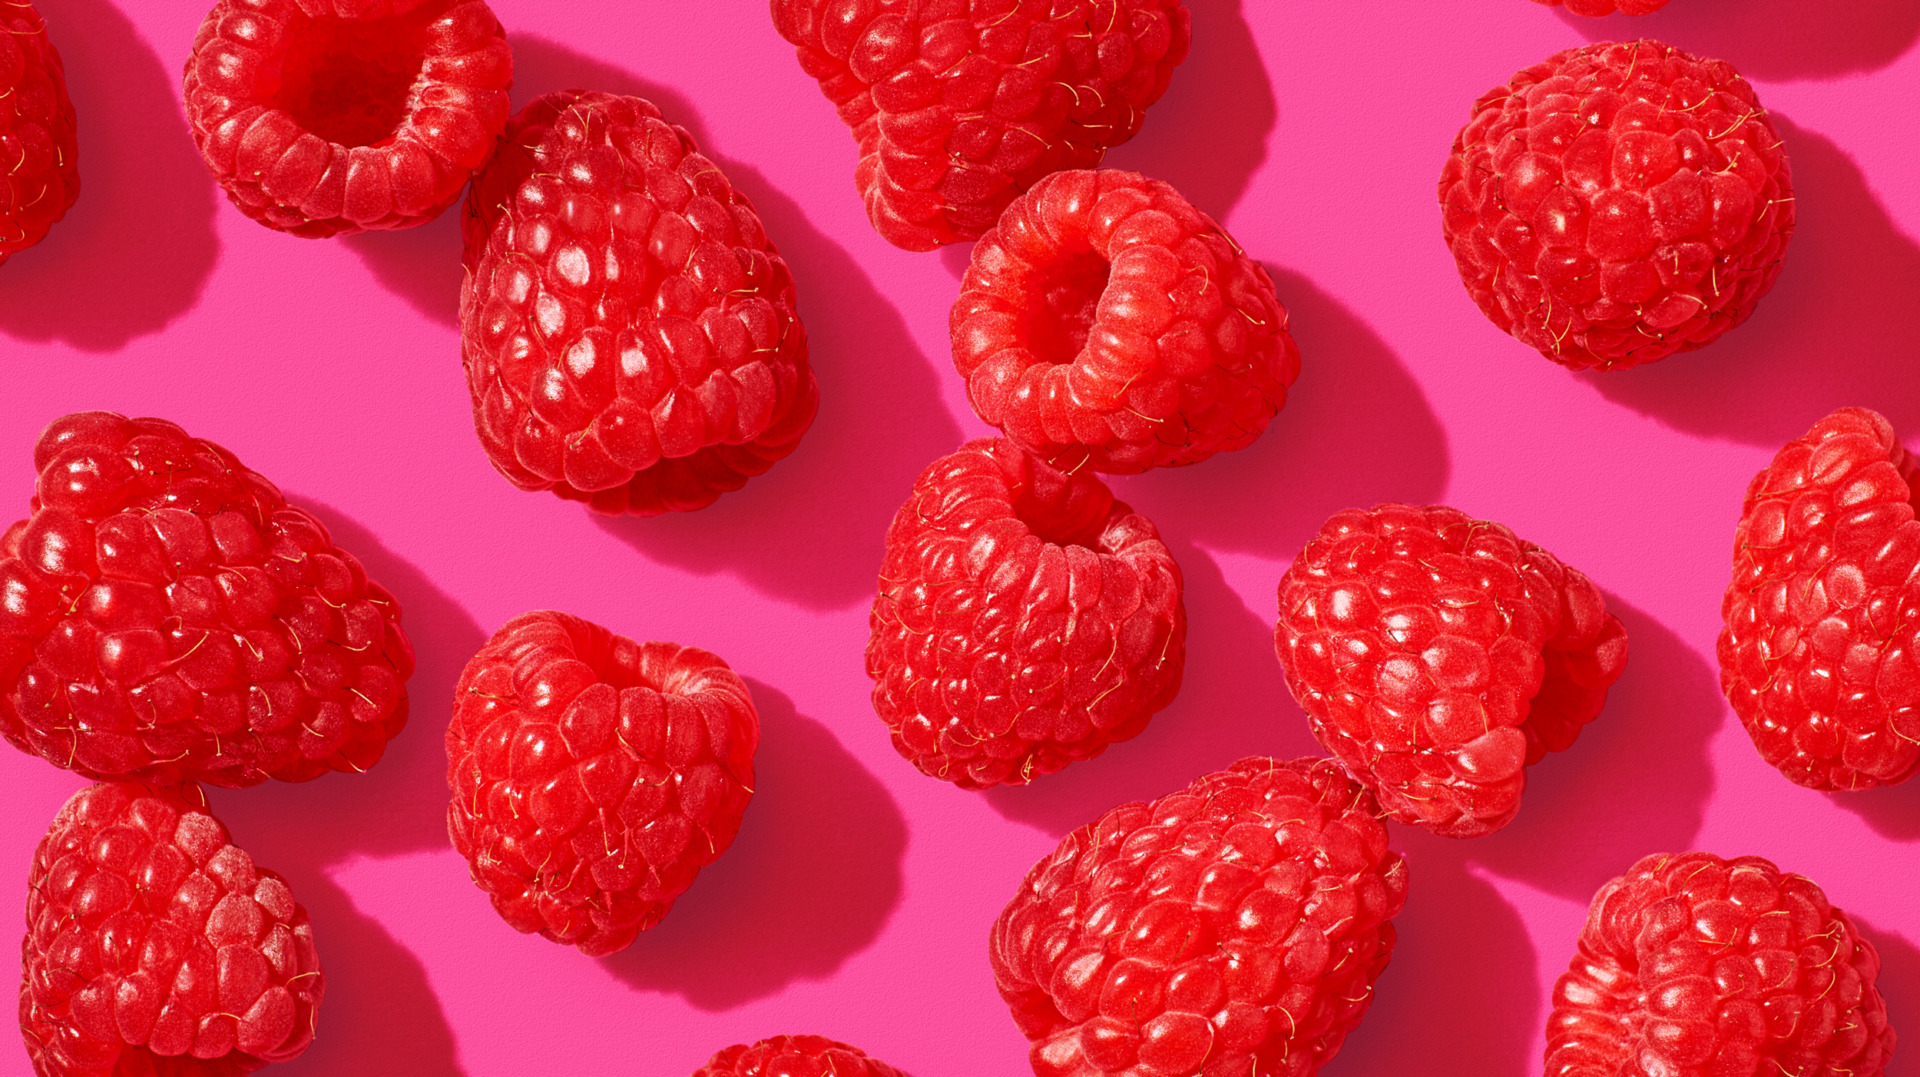 Image of Always Fresh raspberries on a pink background.